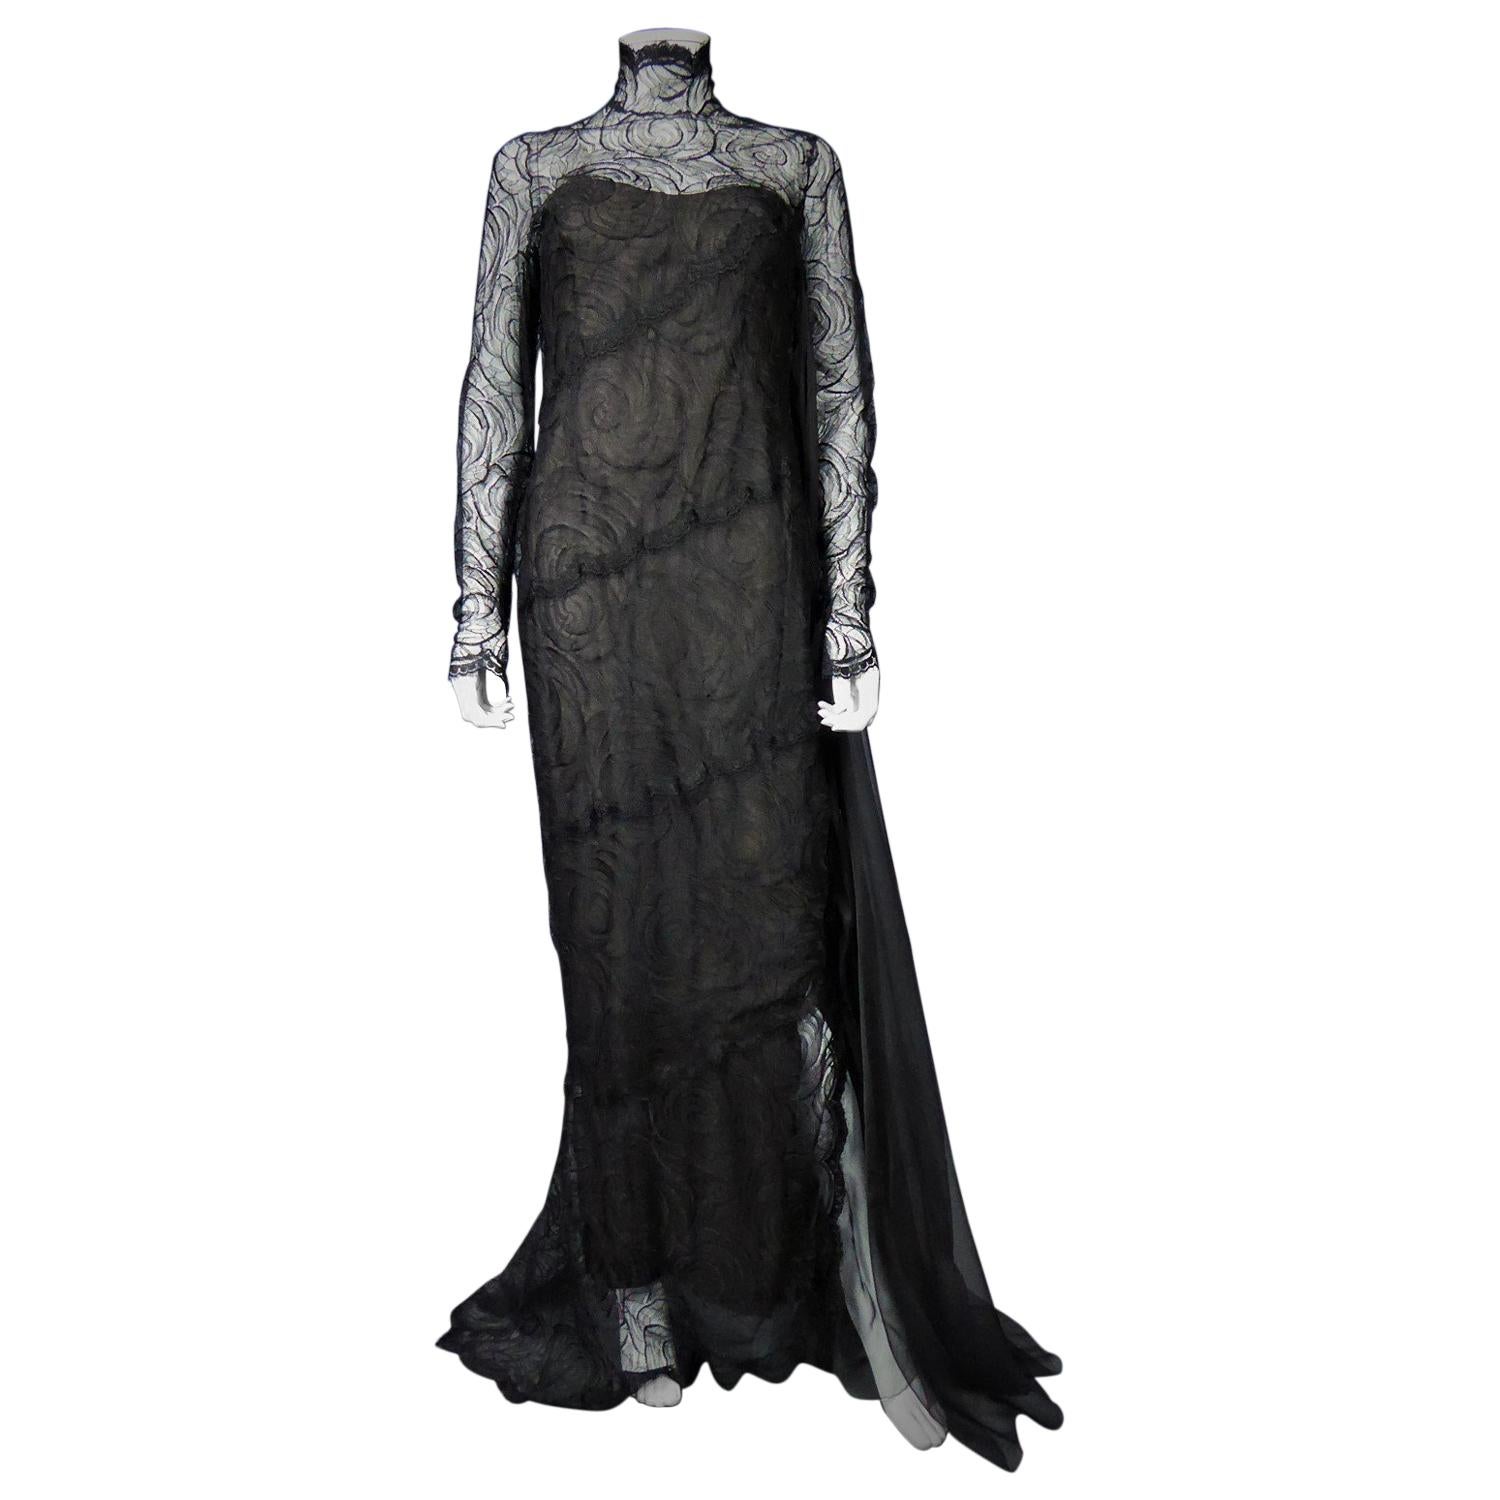 A Chanel Haute Couture Evening Dress by Karl Lagerfeld in Calais Lace Circa 1997